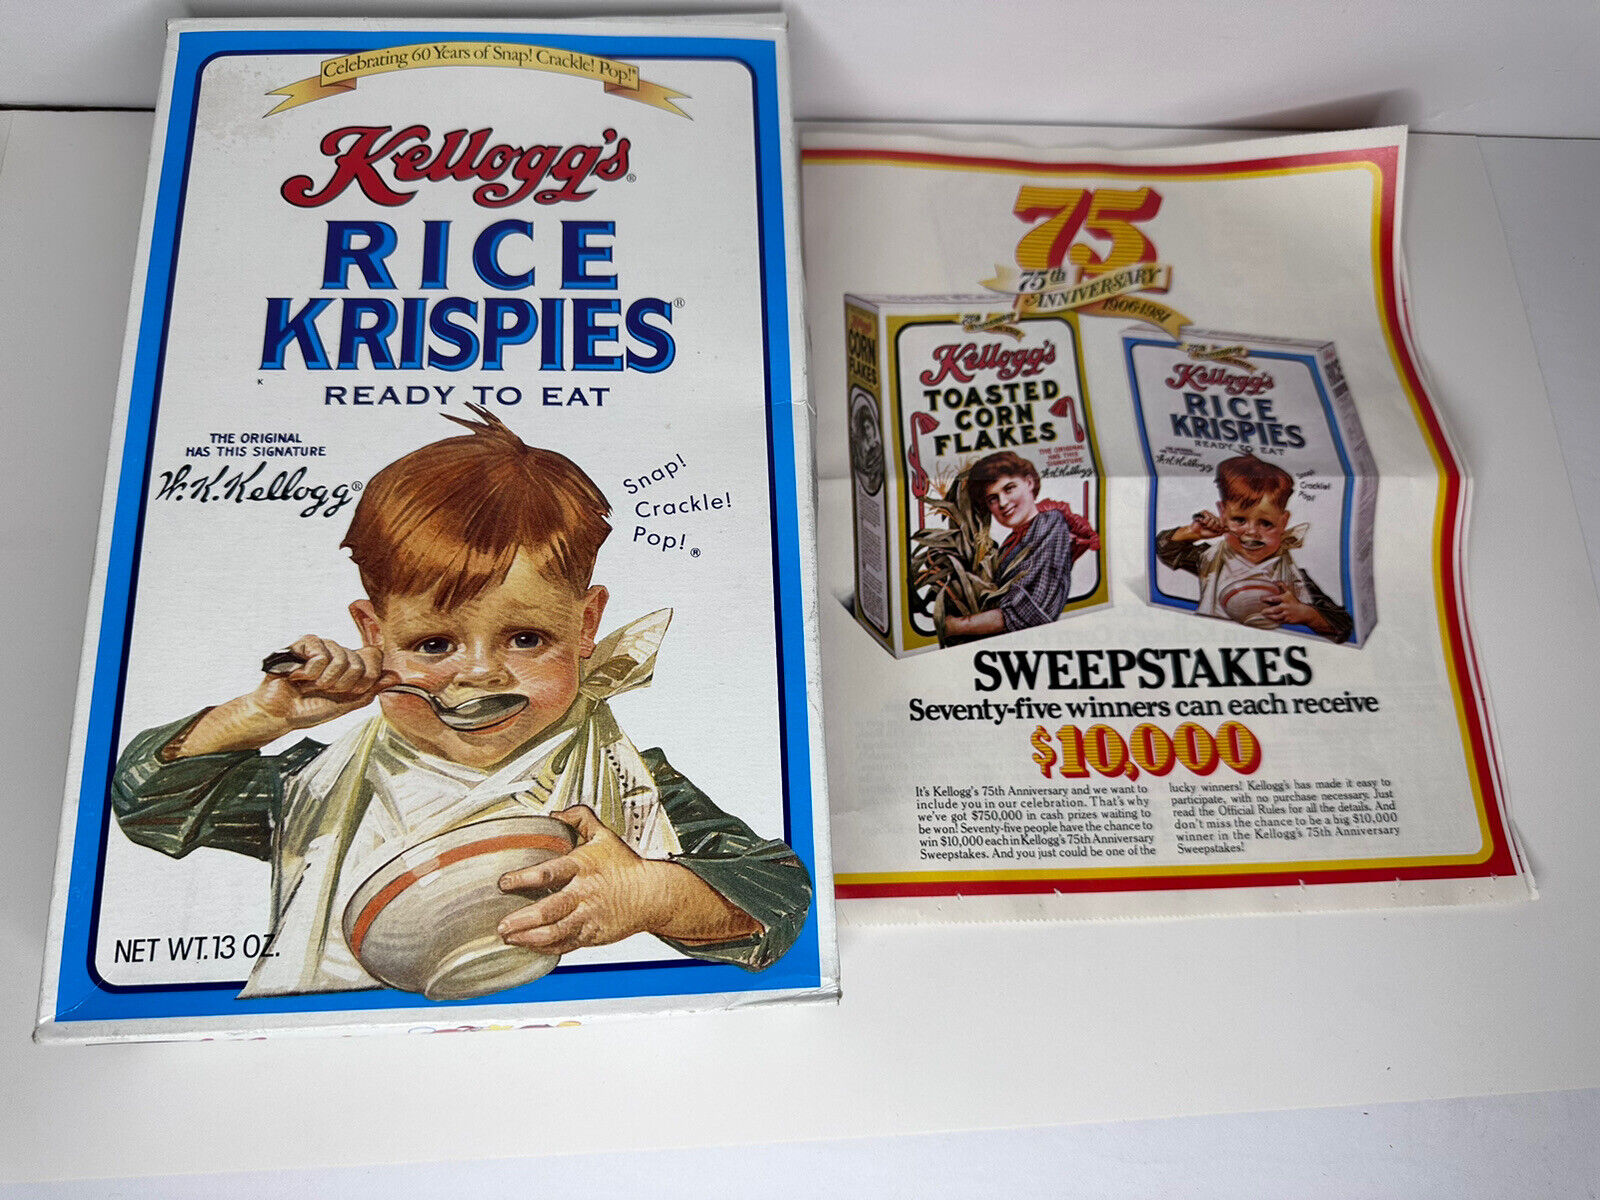 Rare Vintage 1981 Kellogg's Rice Krispies Cereal Box with Original Coupons Ads